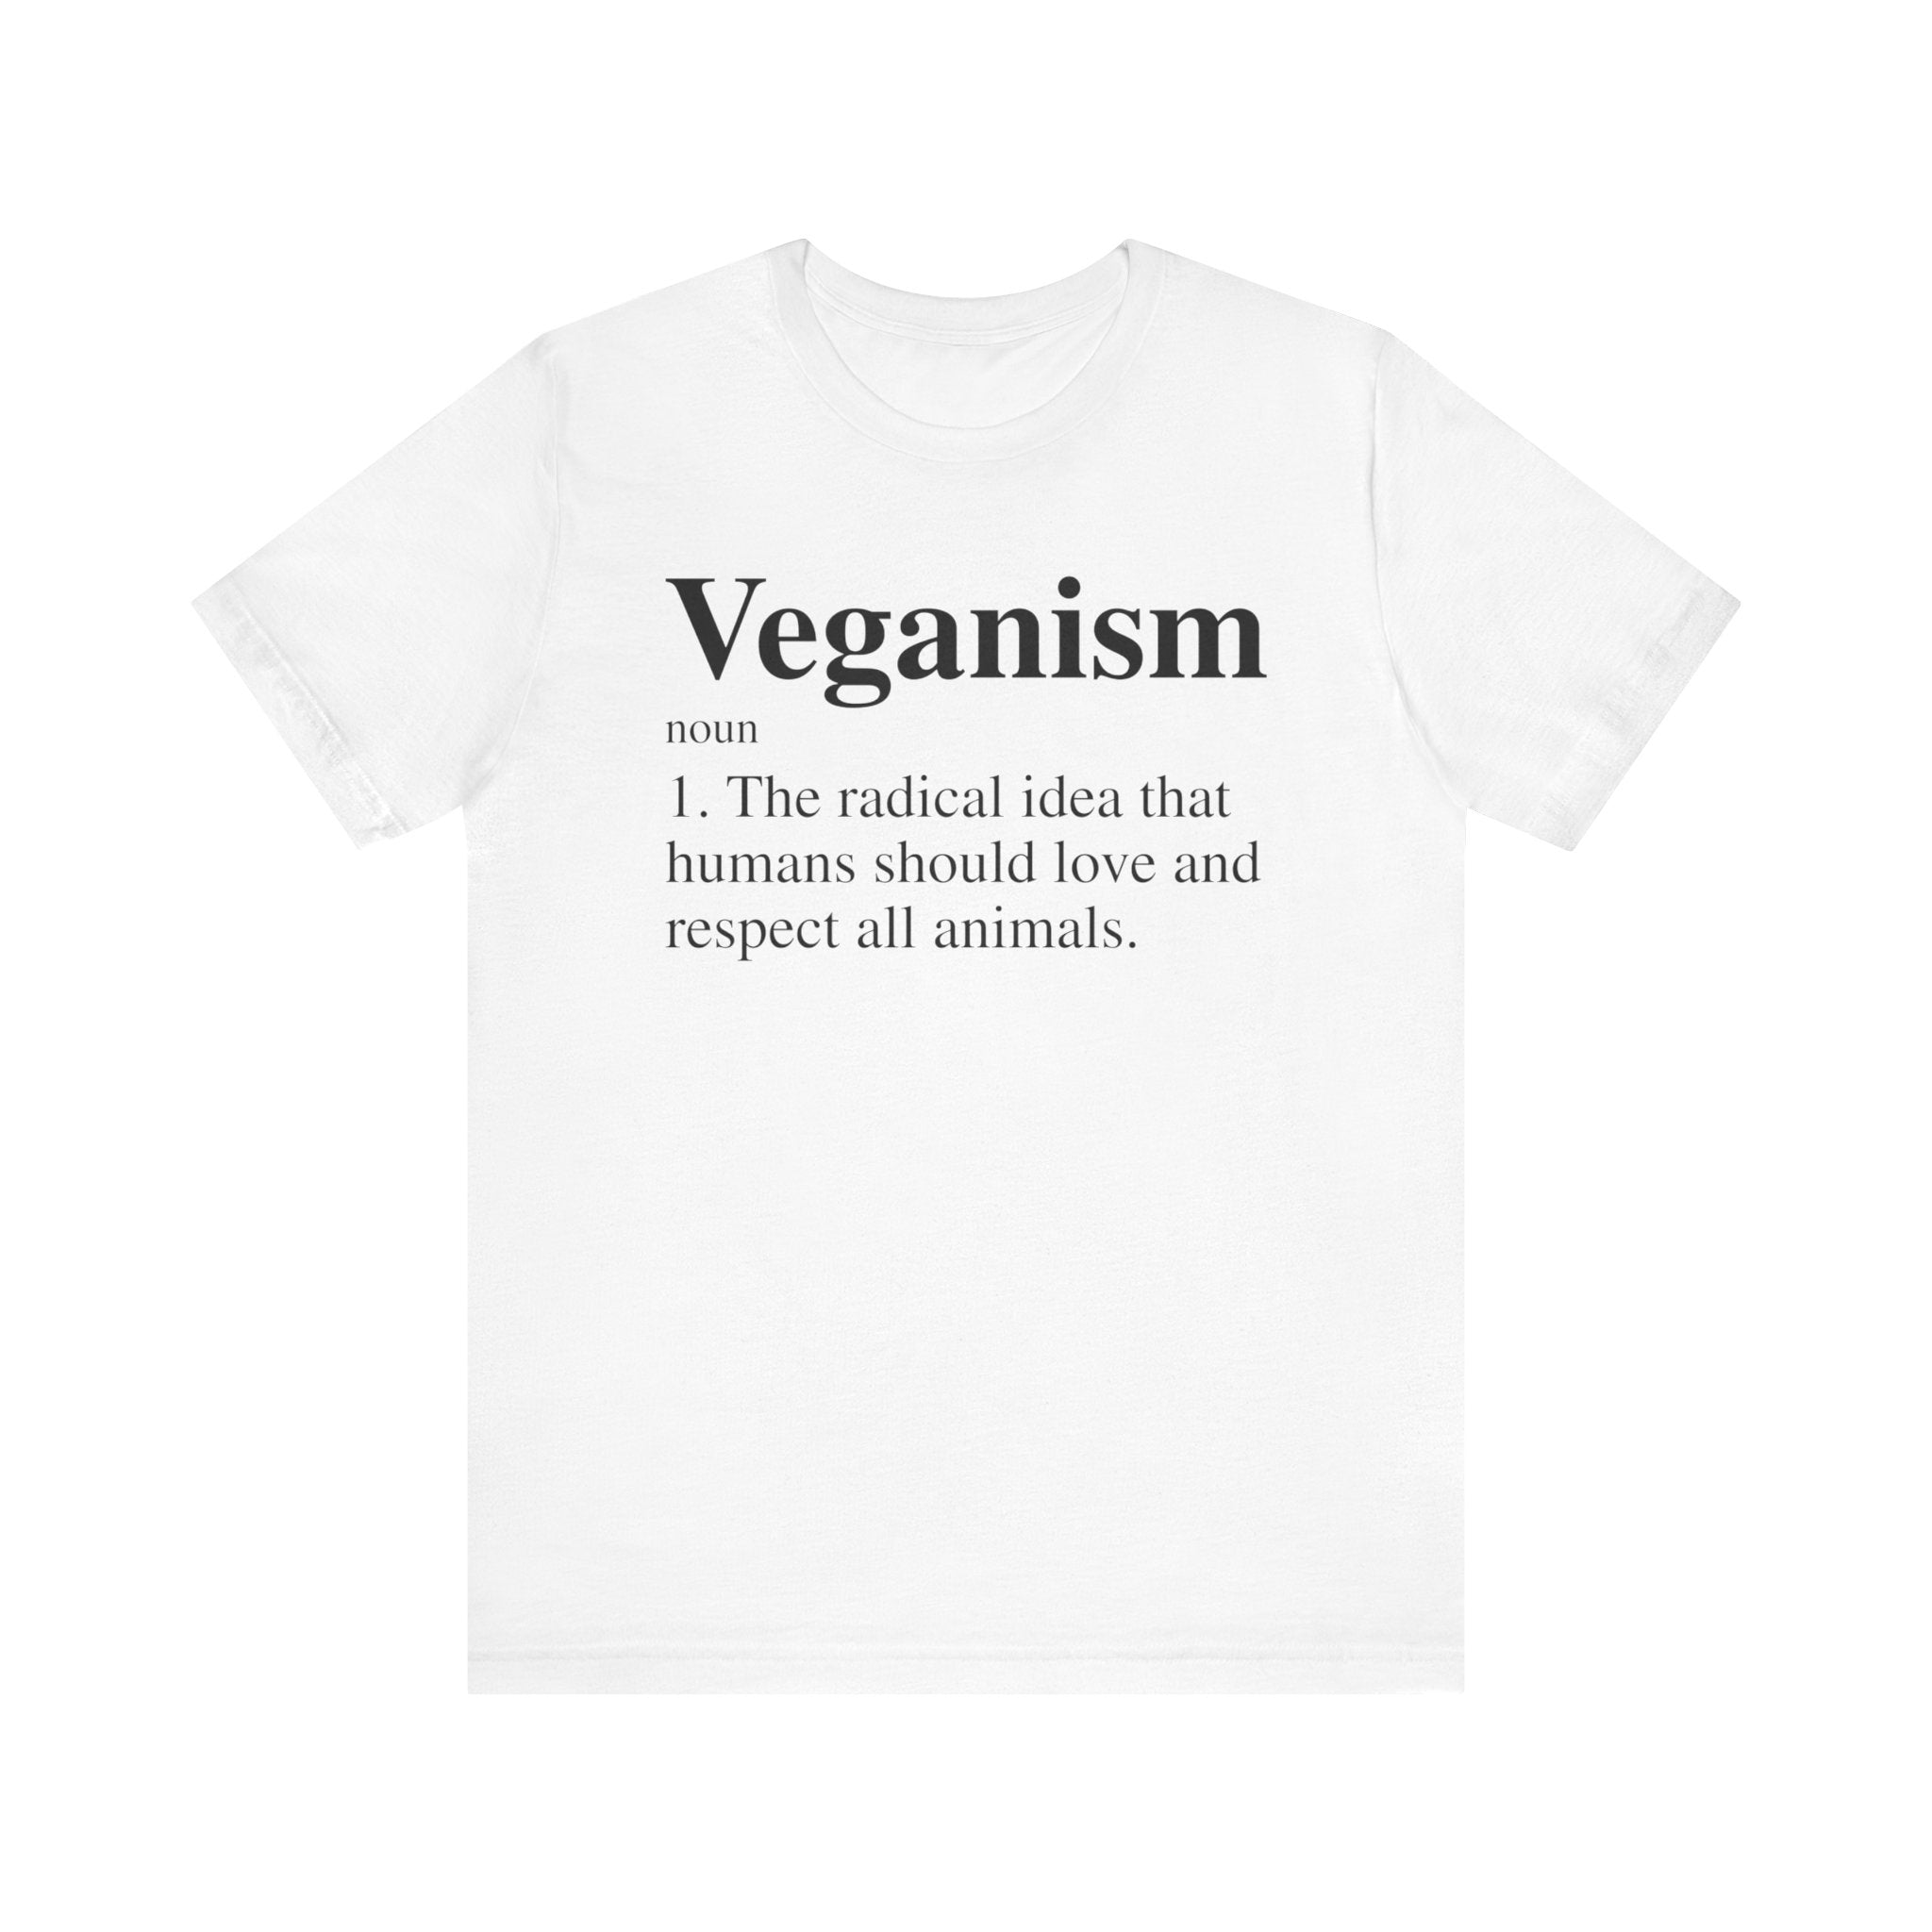 Unisex Veganism T-Shirt with black text defining veganism as "the radical idea that humans should love and respect all animals.